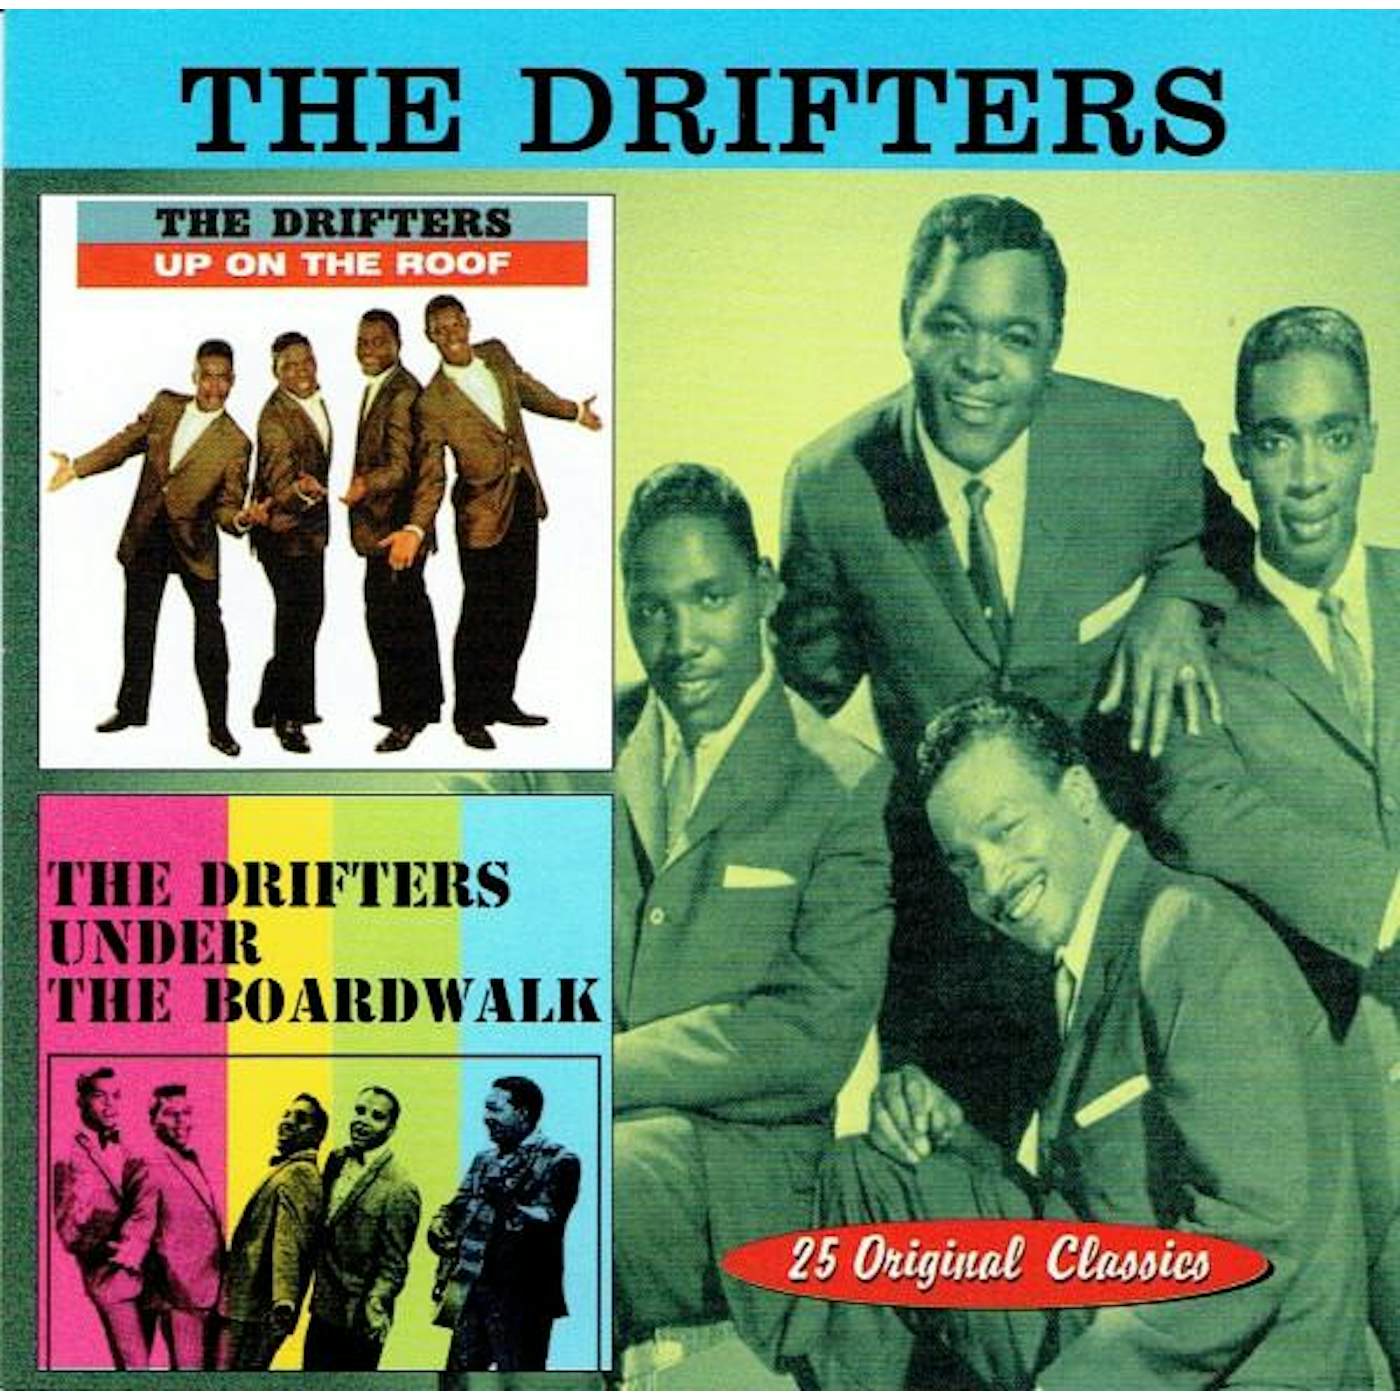 The Drifters UP ON THE ROOF / UNDER THE BOARDWALK CD